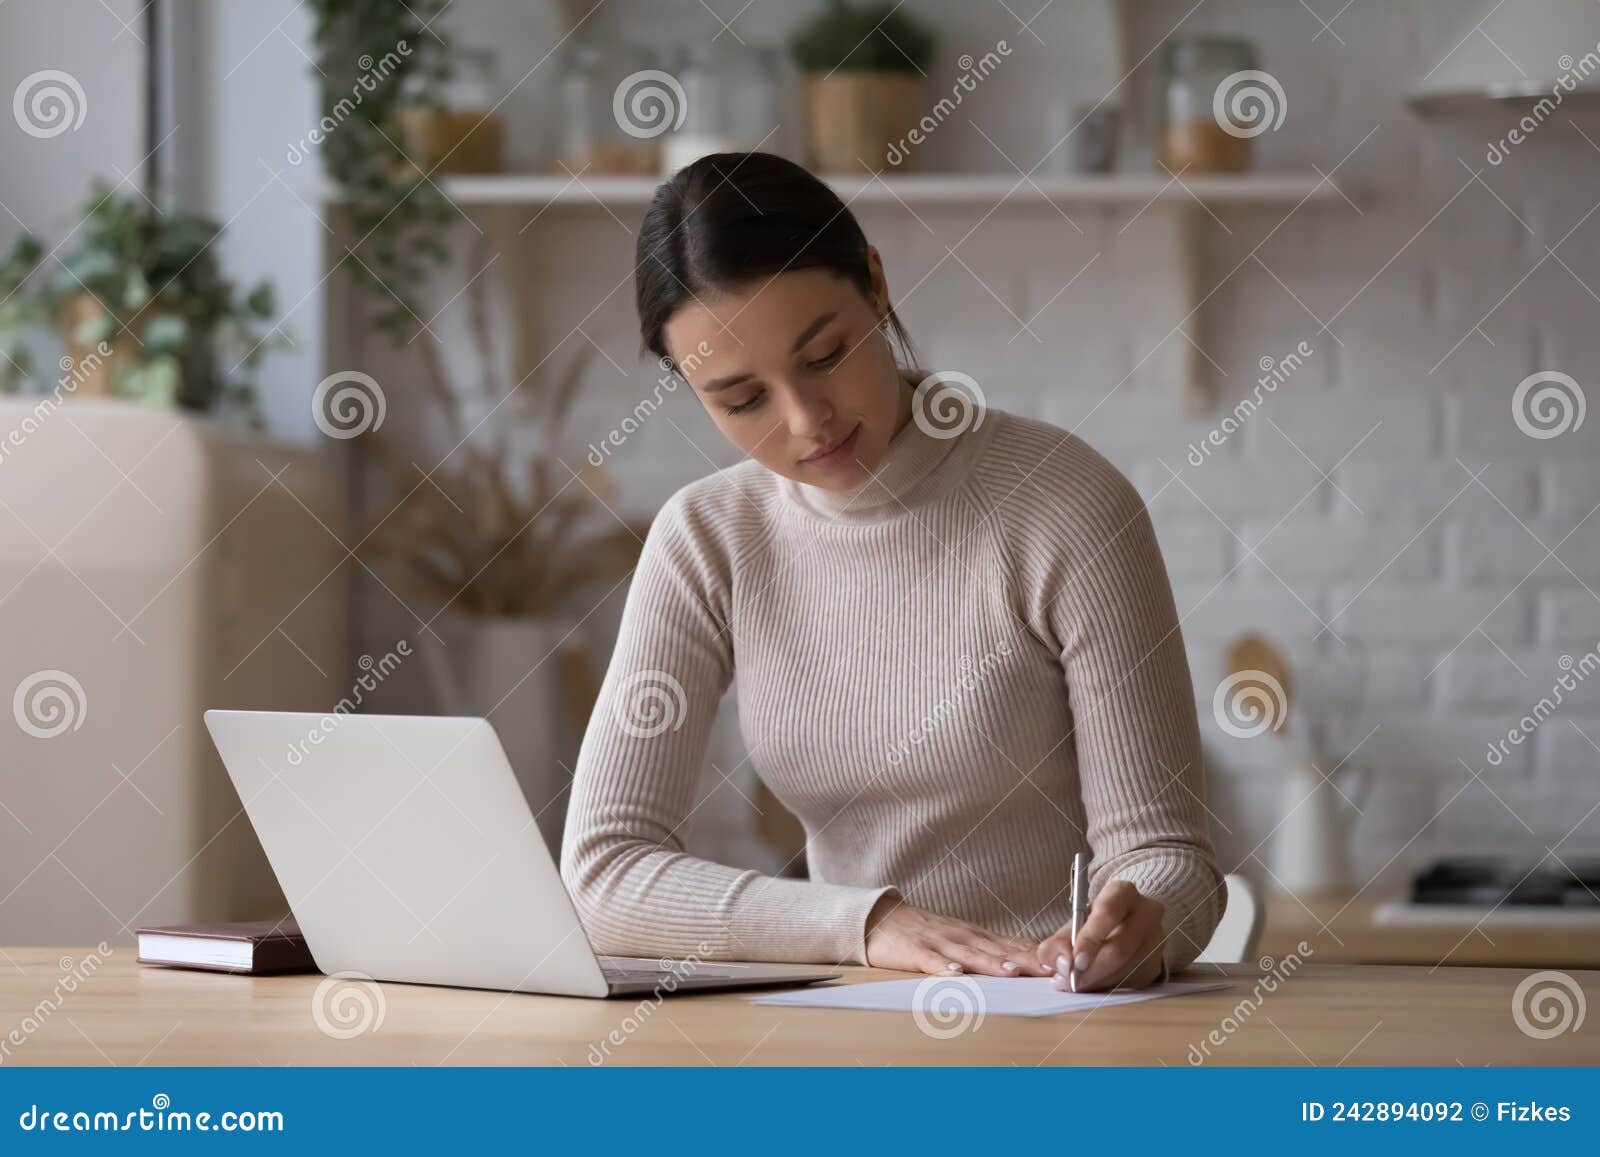 woman sit at table with laptop jotting information on paper